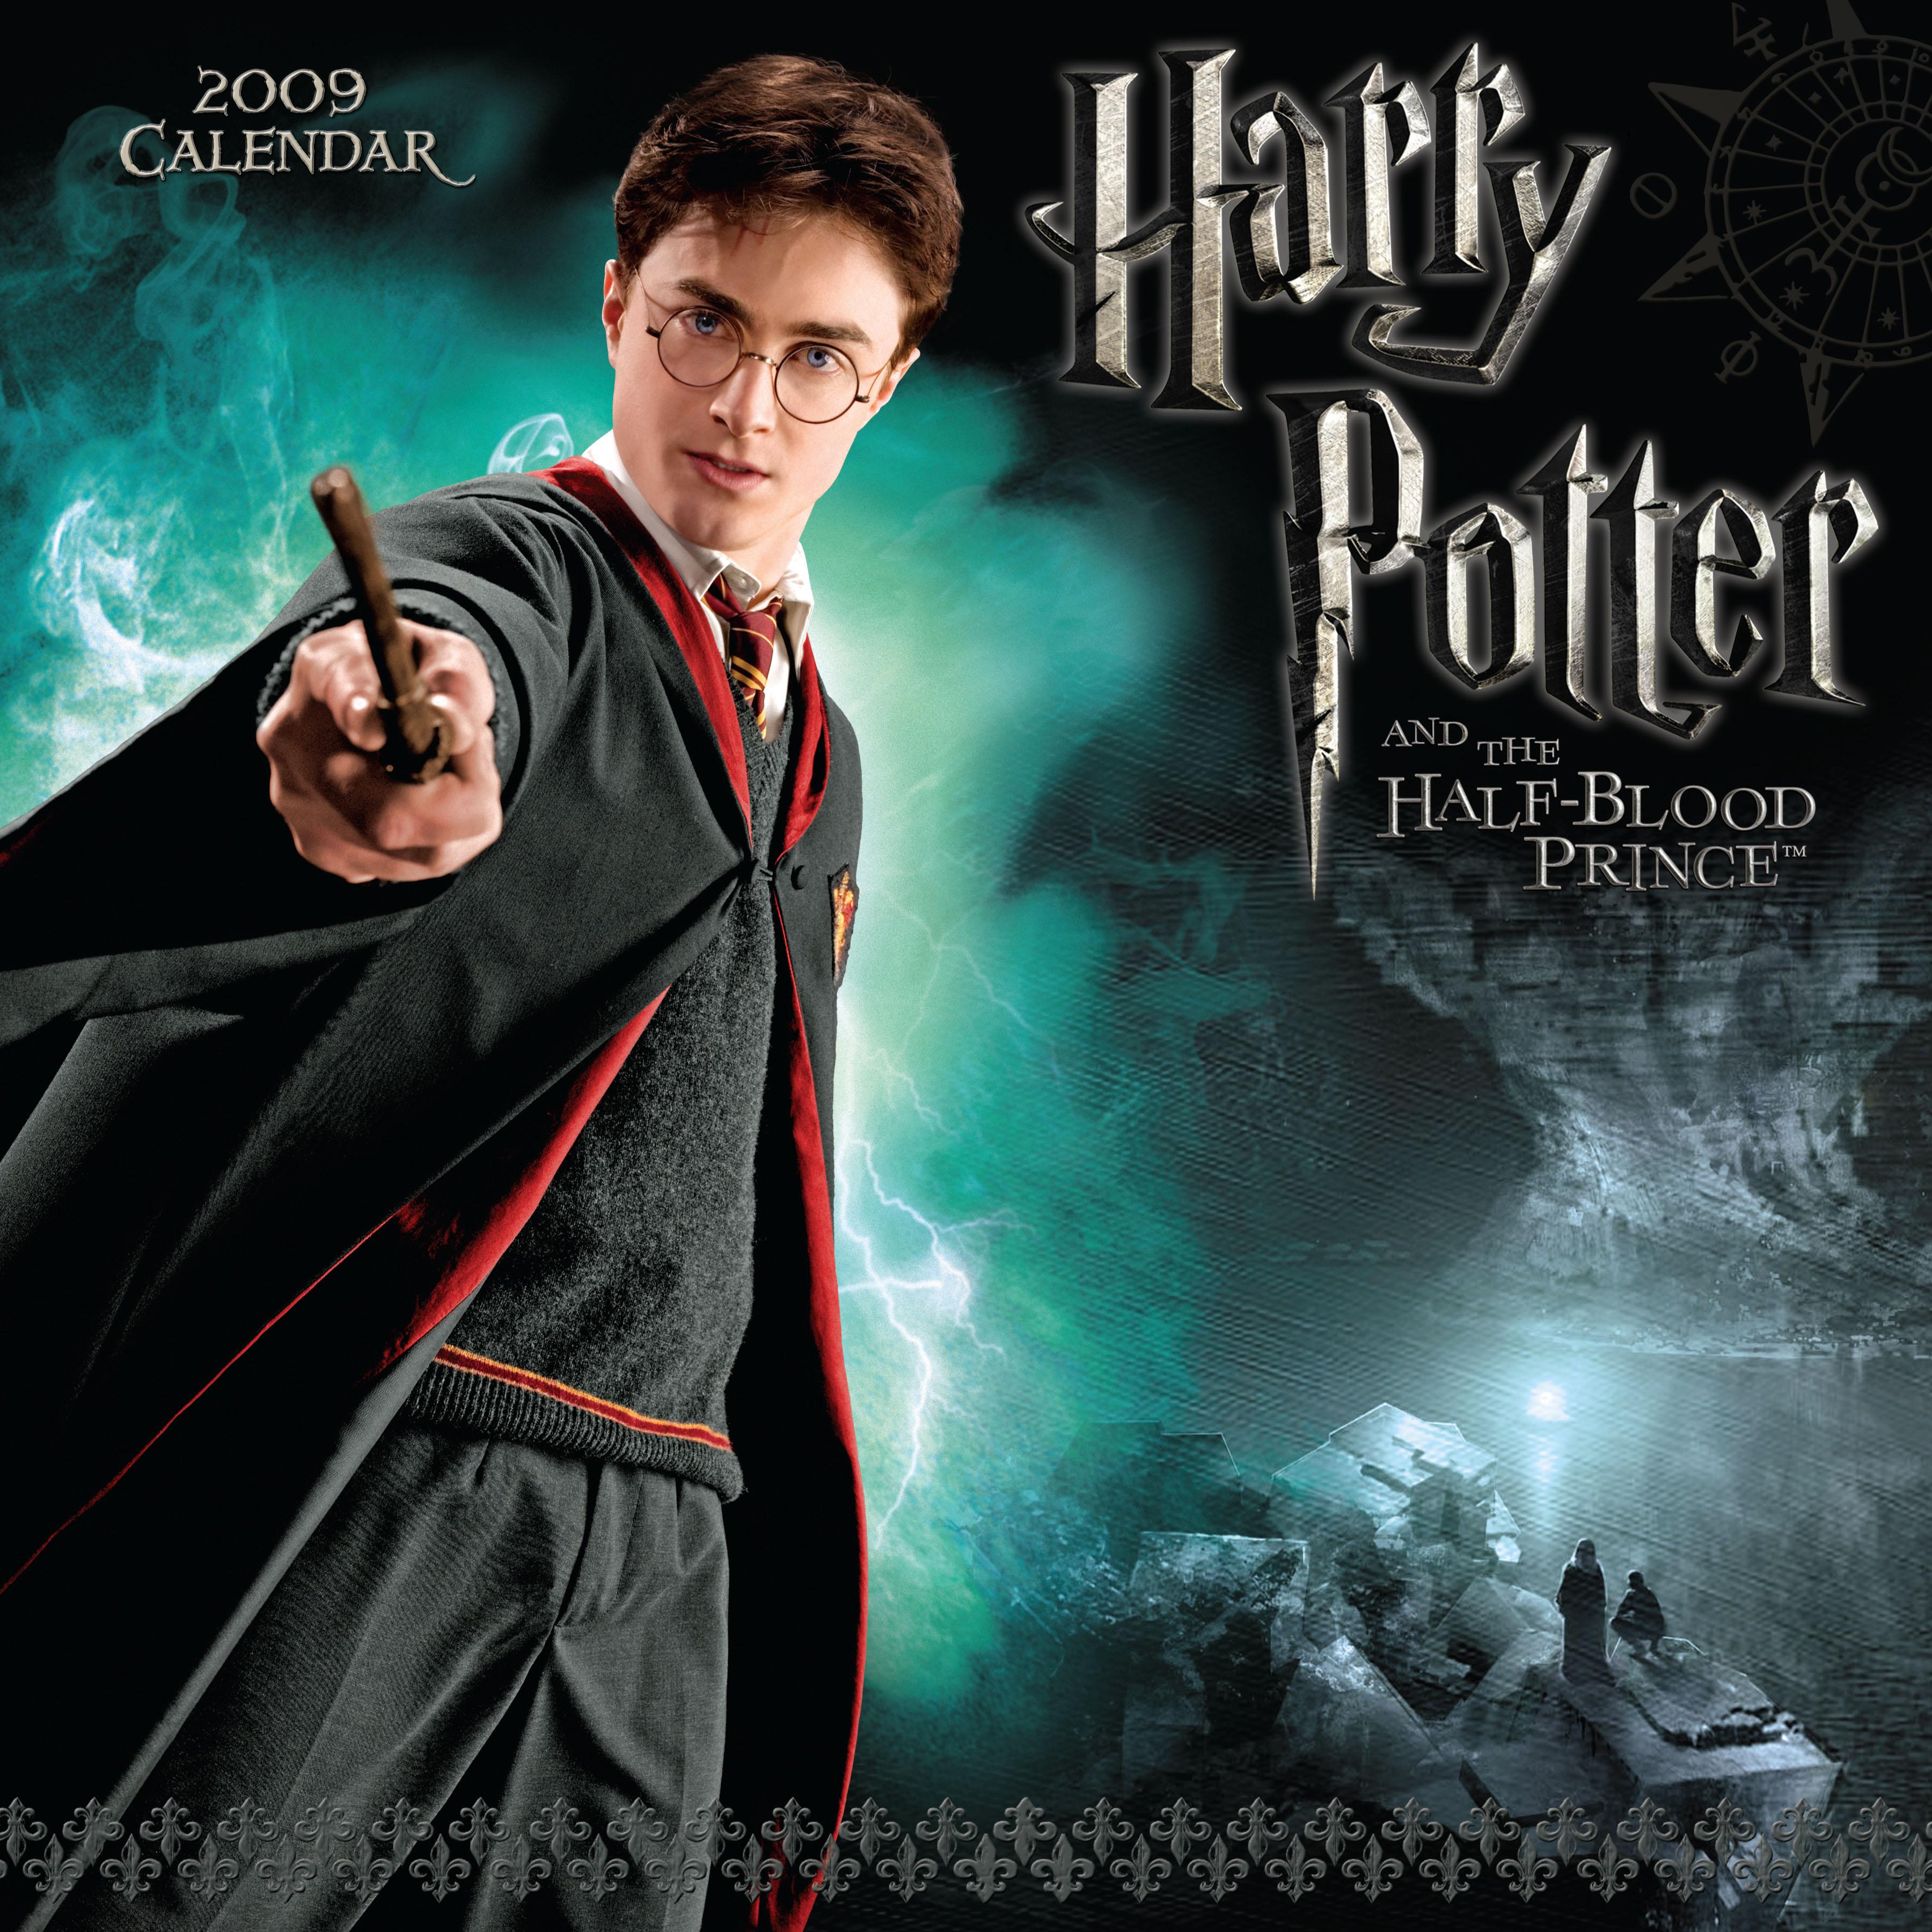 Harry Potter and the Half-Blood Prince 2009 – Movie wallpaper